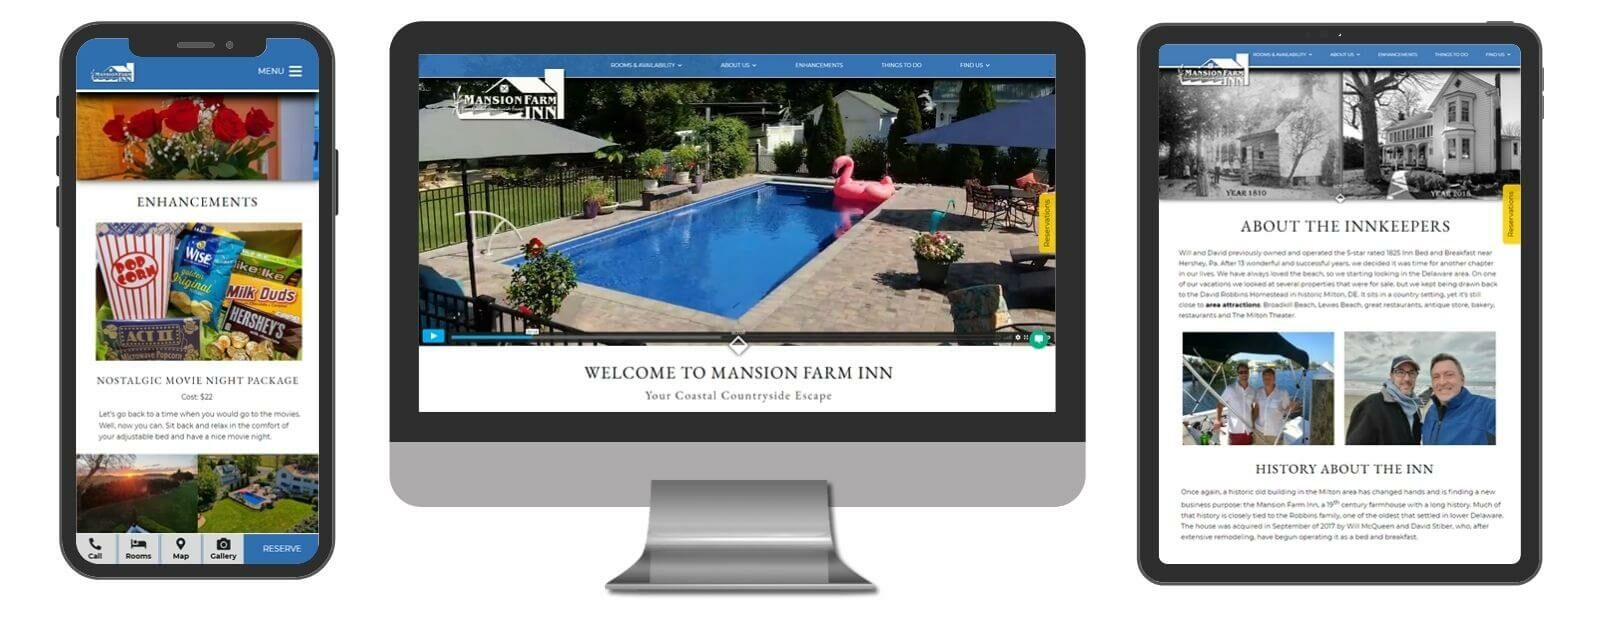 Mansion Farm Inn website displayed in 3 sizes - mobile, template and desktop